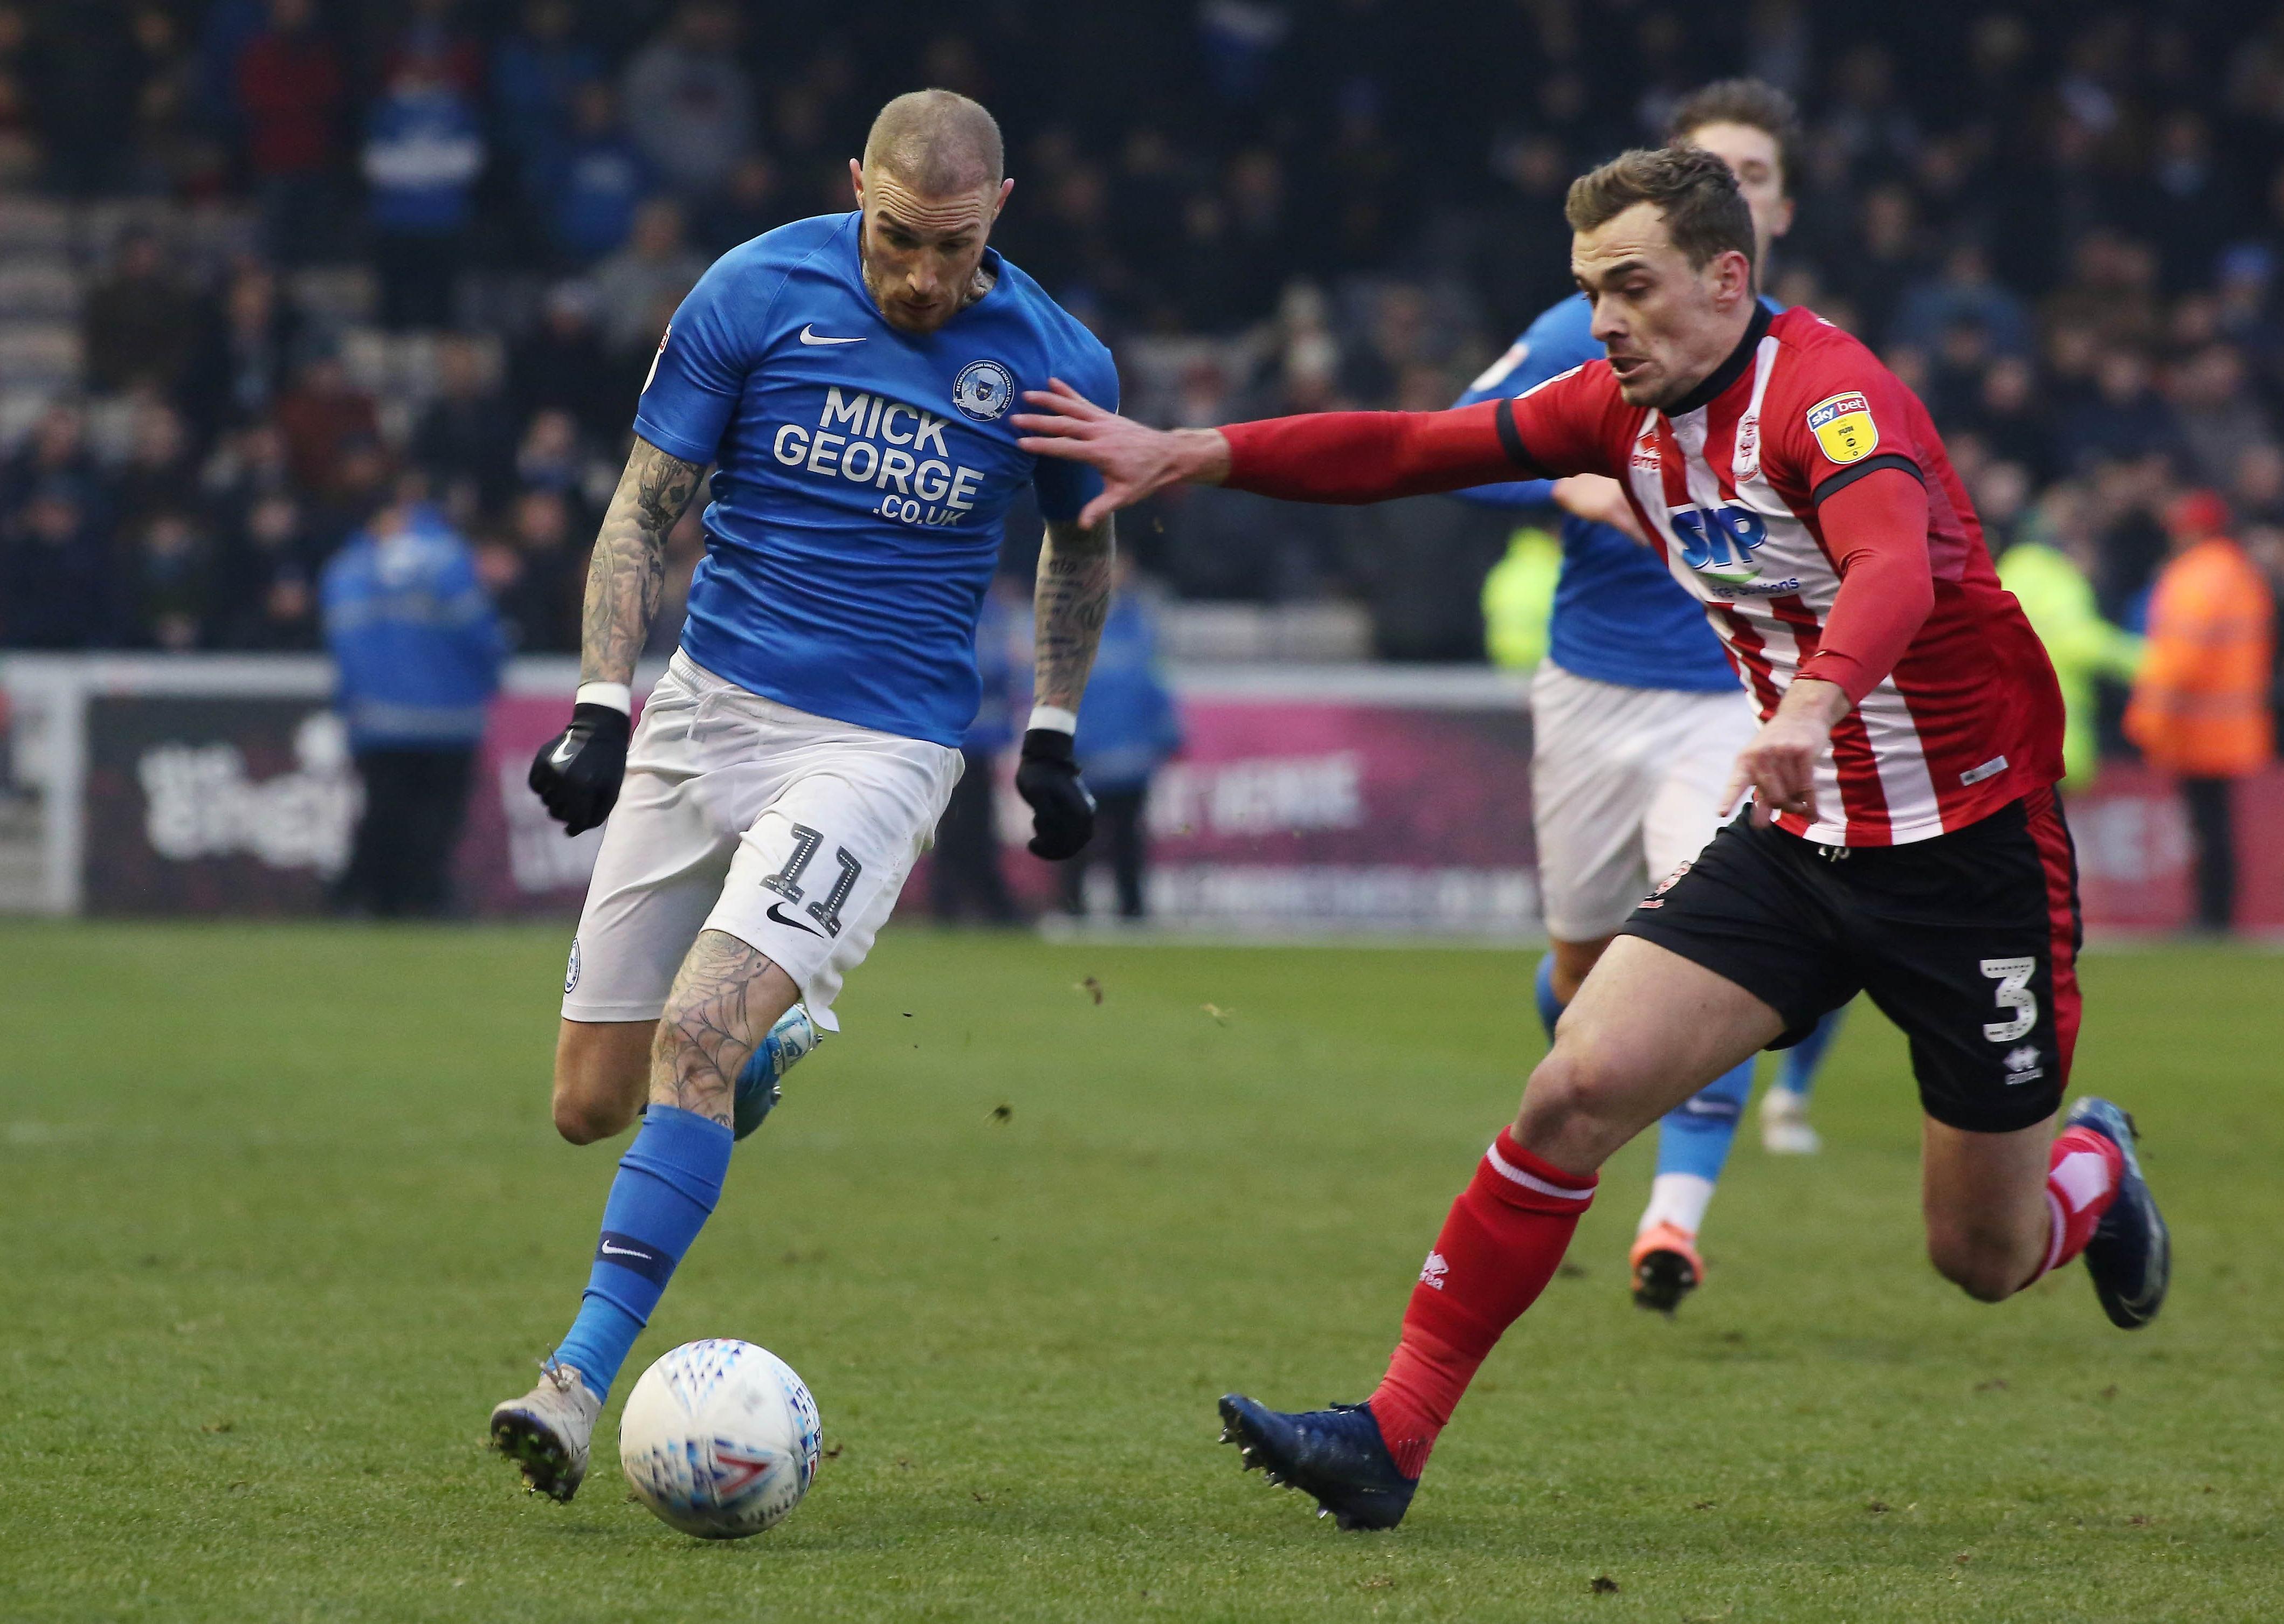 Marcus Maddison of Peterborough United in action with Harry Toffolo of Lincoln City. Photo: Joe Dent/theposh.com.